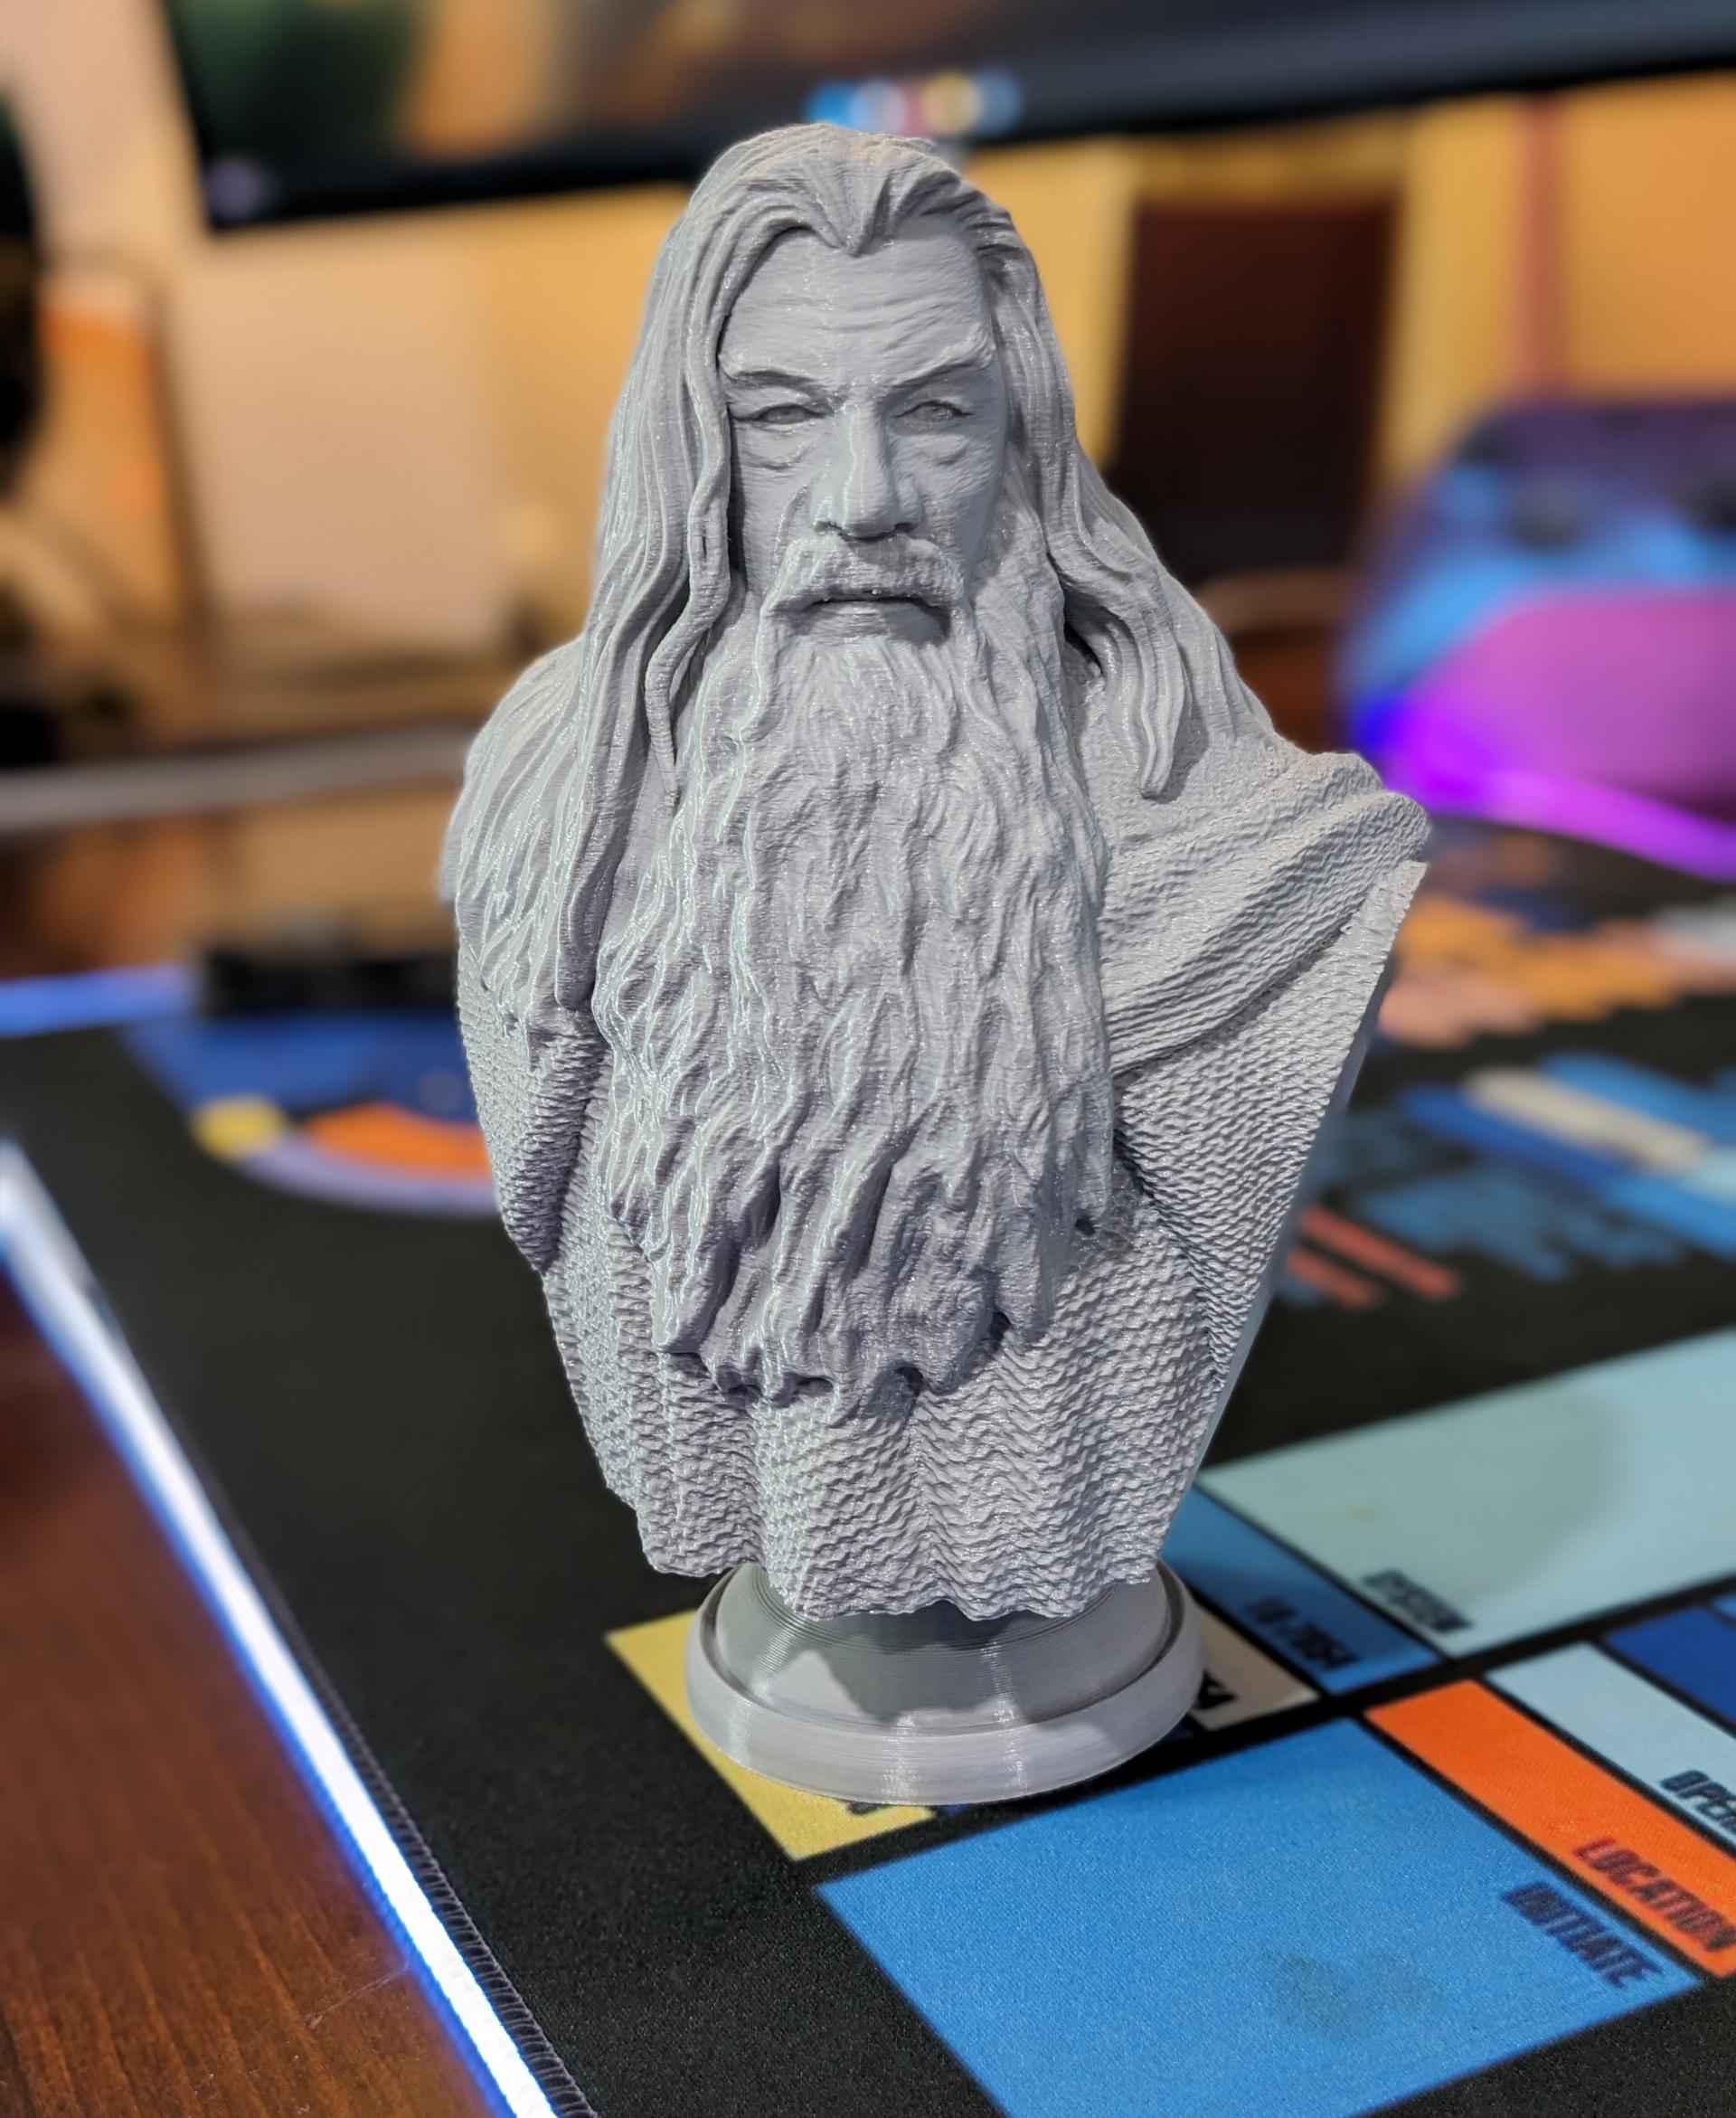 Gandalf Bust - Lord of the Rings (Pre-Supported) - Ender 3 V3 KE at 200mm/s with .12mm layers. Gray PLA+ - 3d model